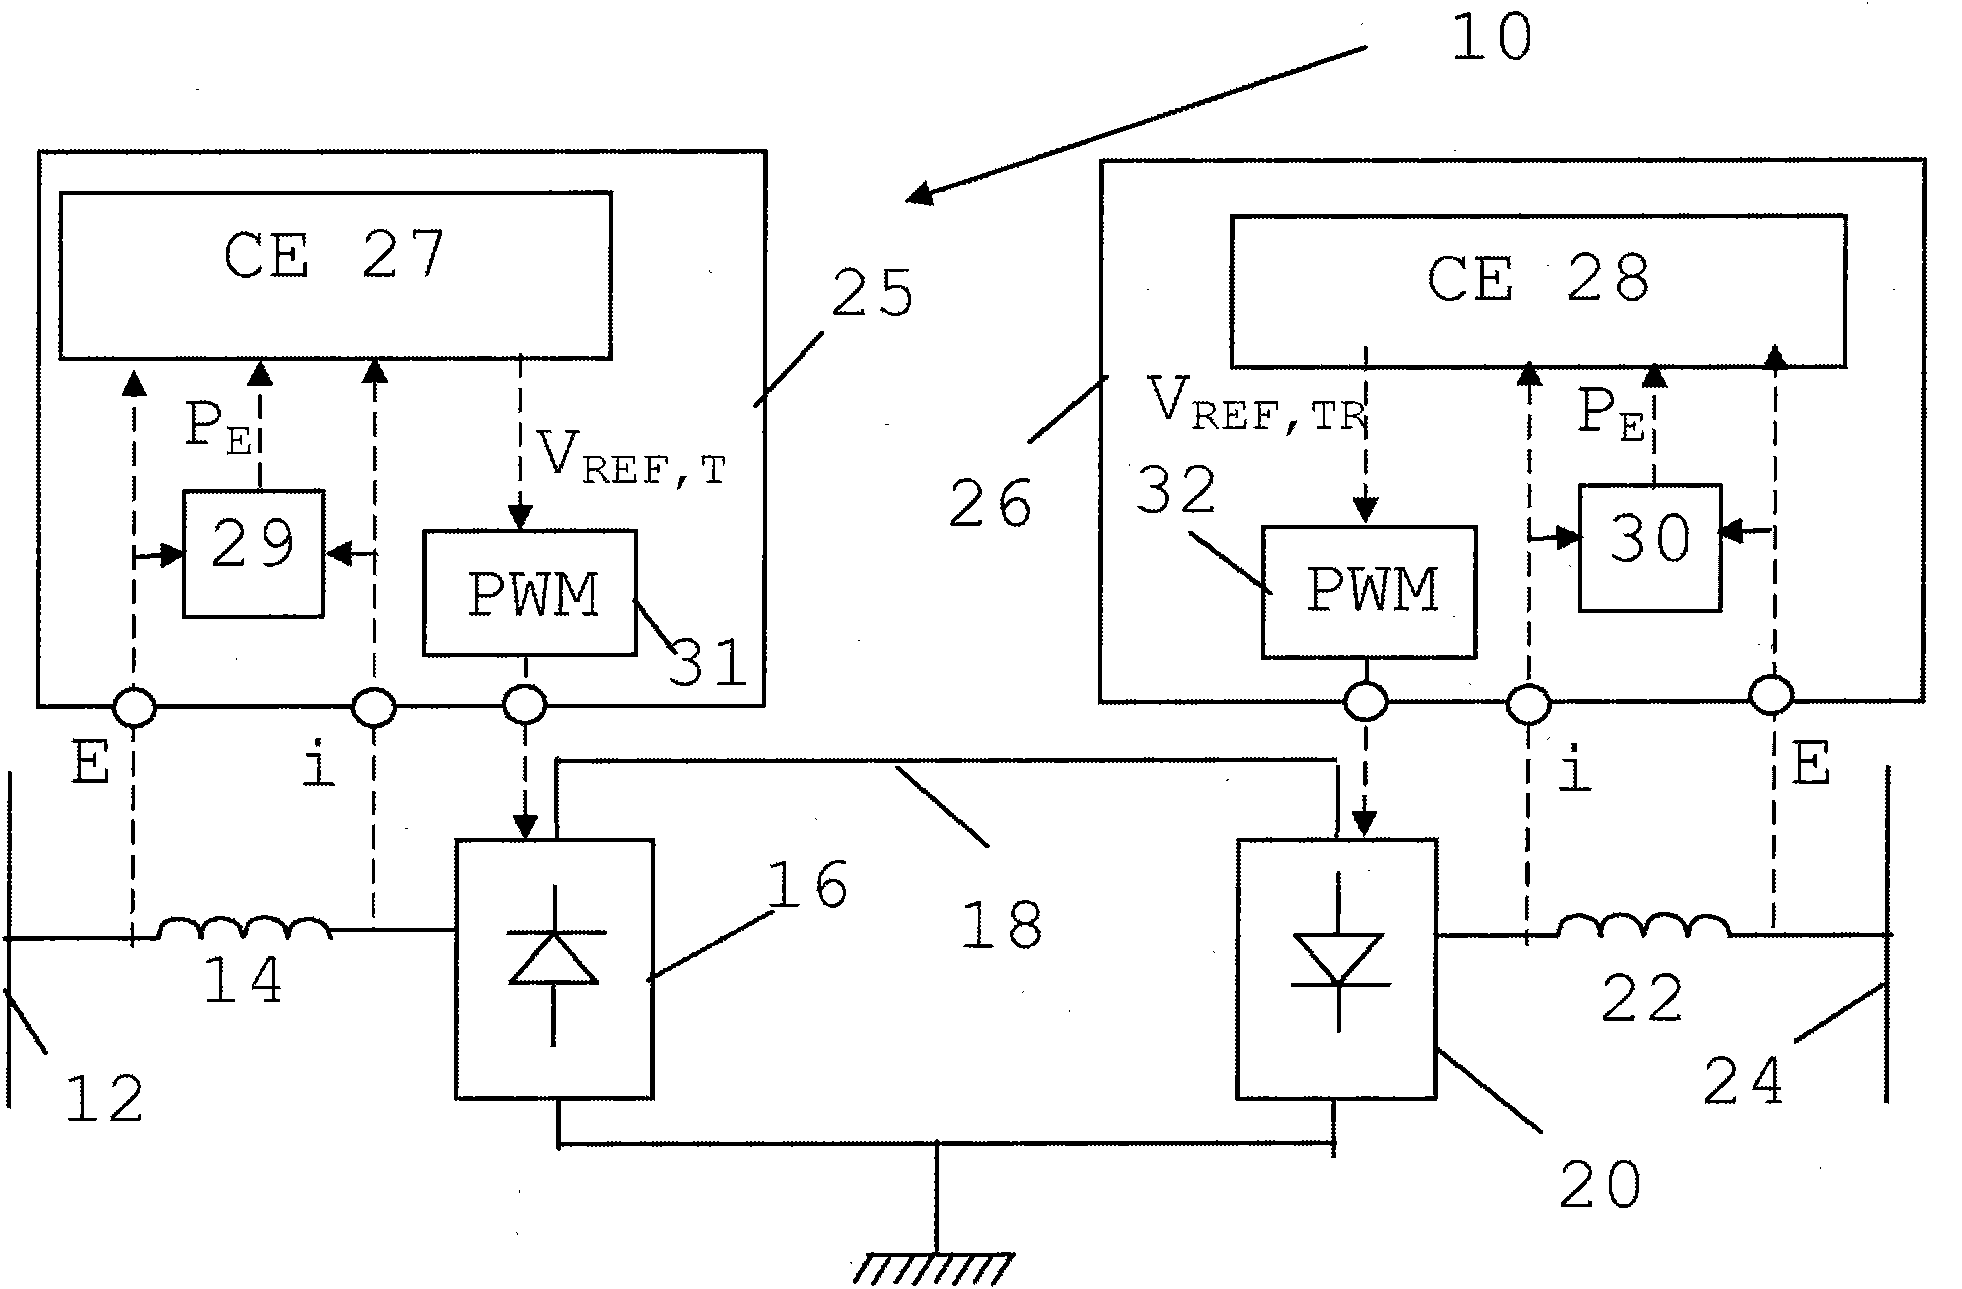 Emulation of control to voltage source converter using synchronous machine